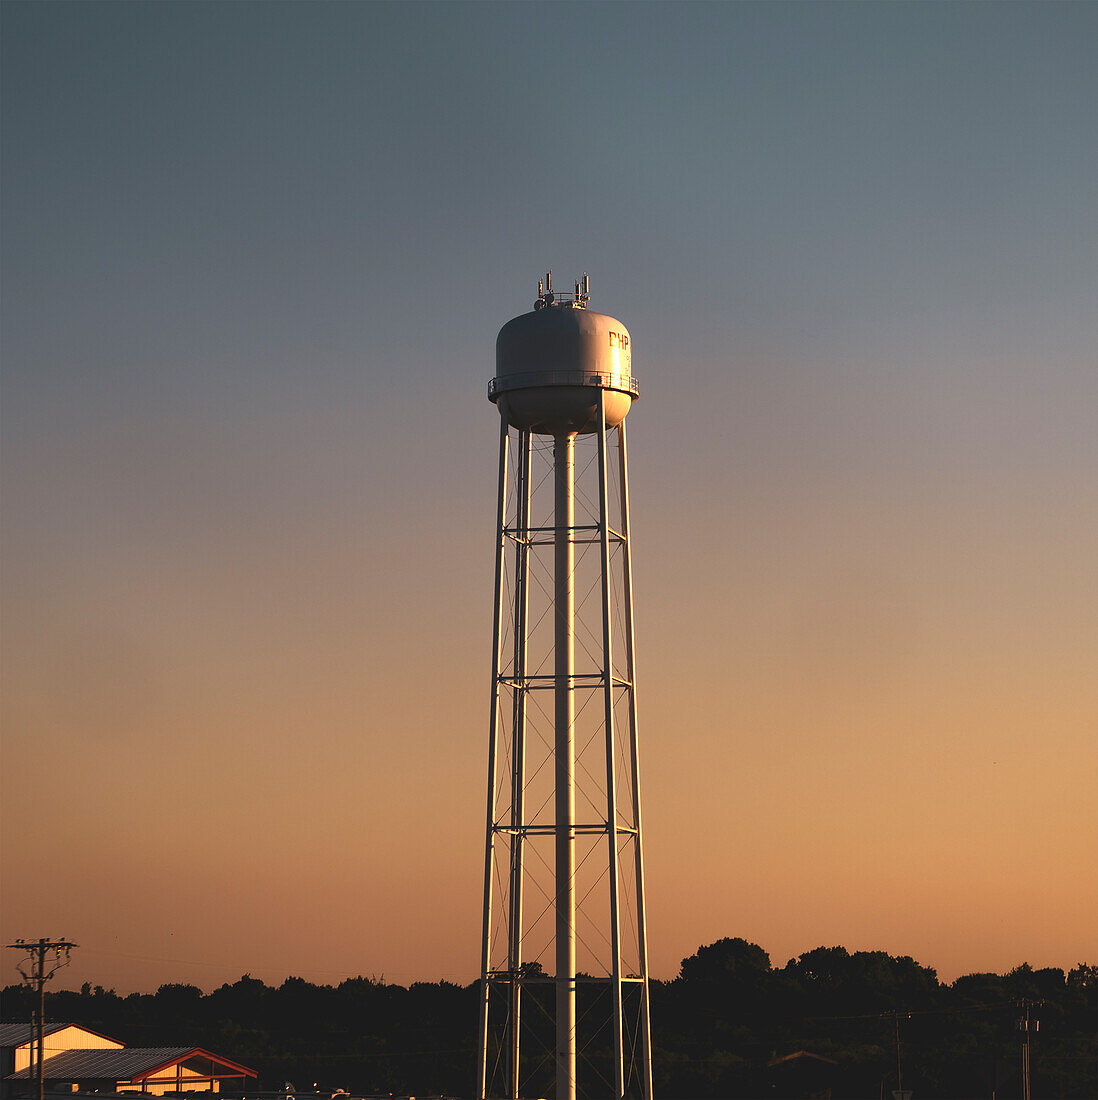 A water tower in East Texas at sunset